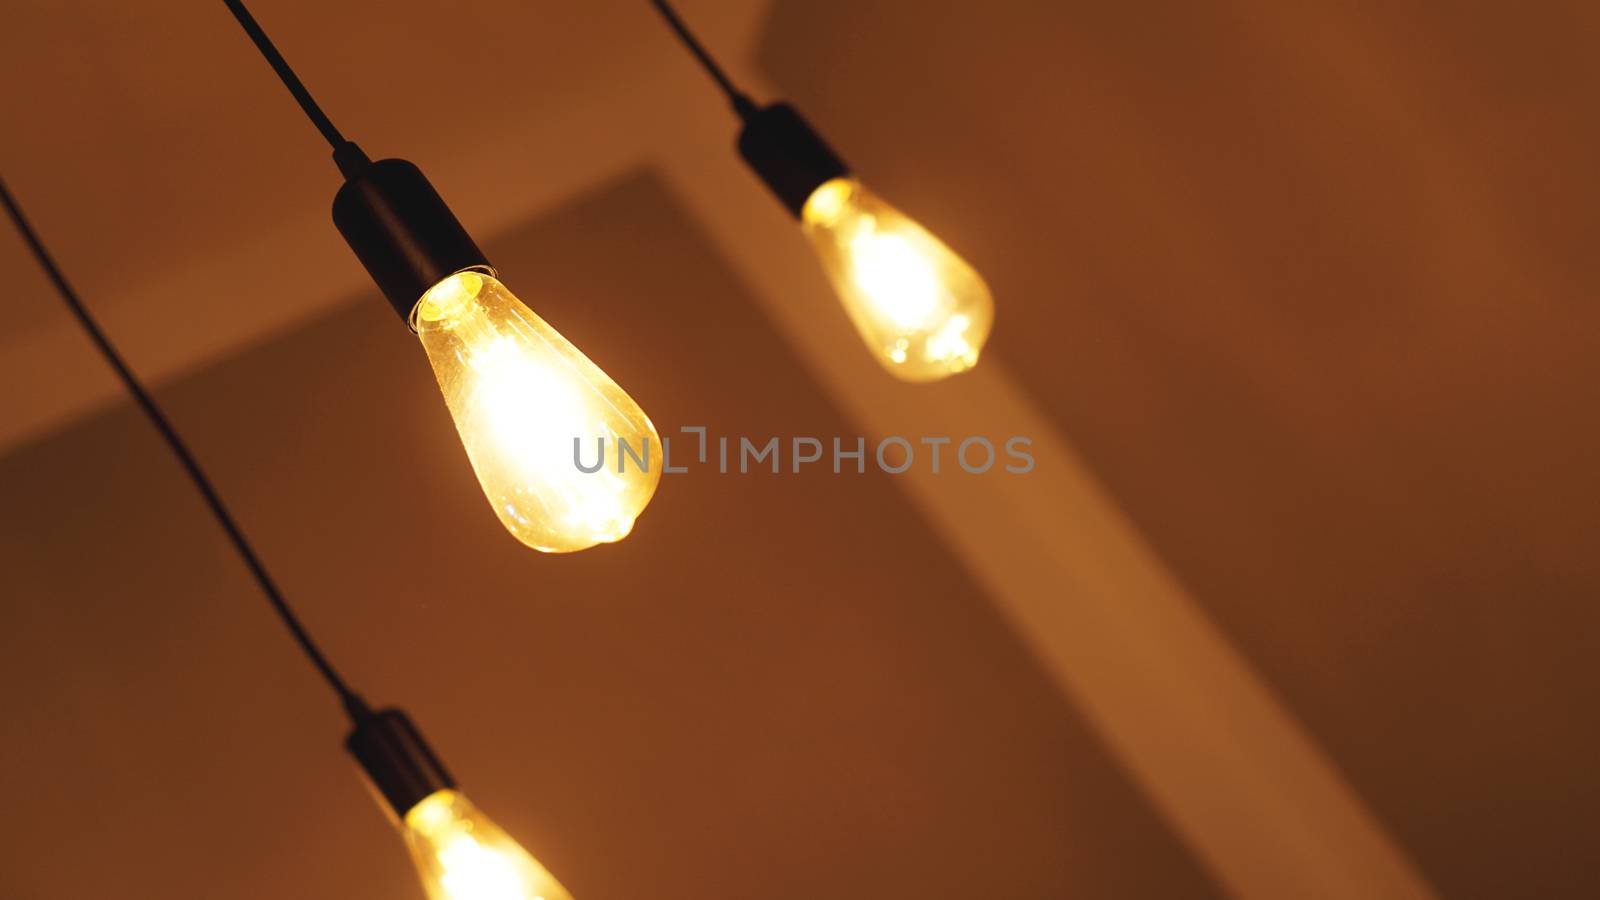 Decorative antique edison style light tungsten bulbs against yellow wall background